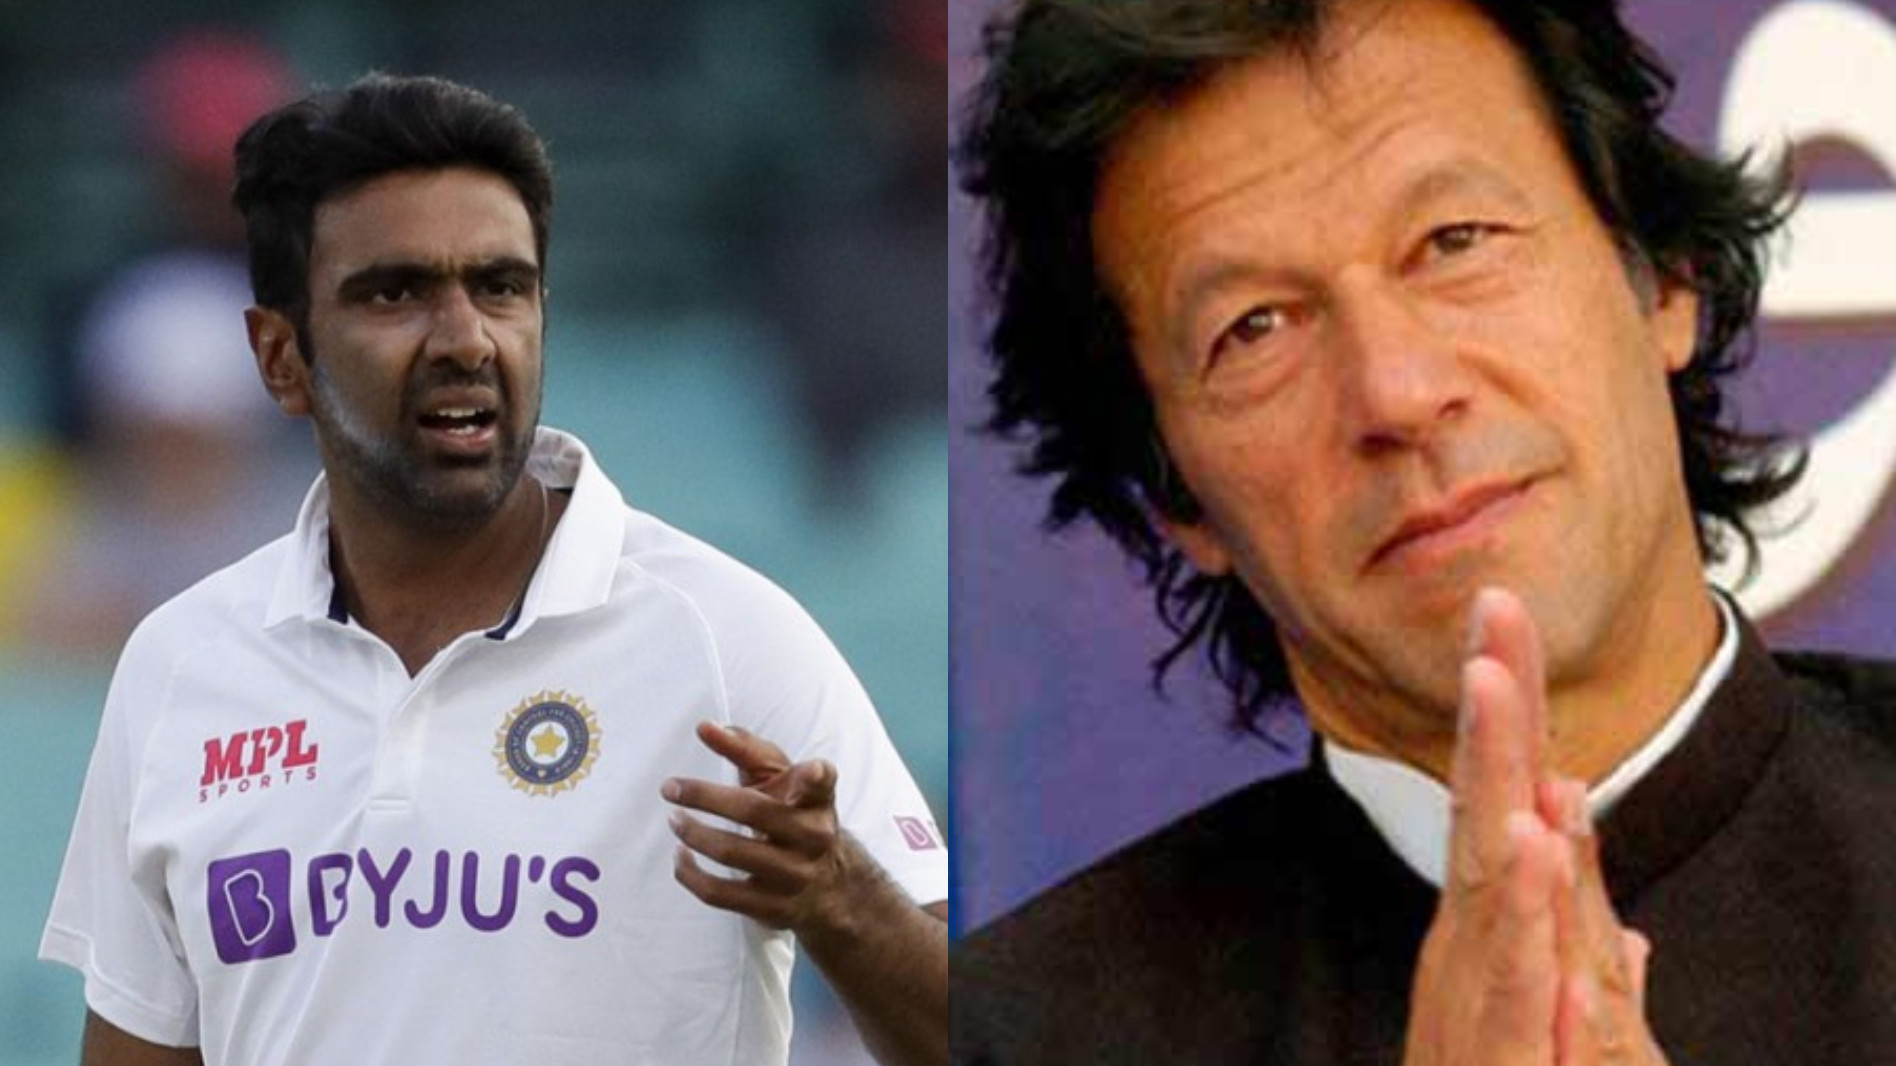 Let’s do better parenting- Ashwin reacts to Imran Khan’s remarks on increase in rape cases in Pakistan